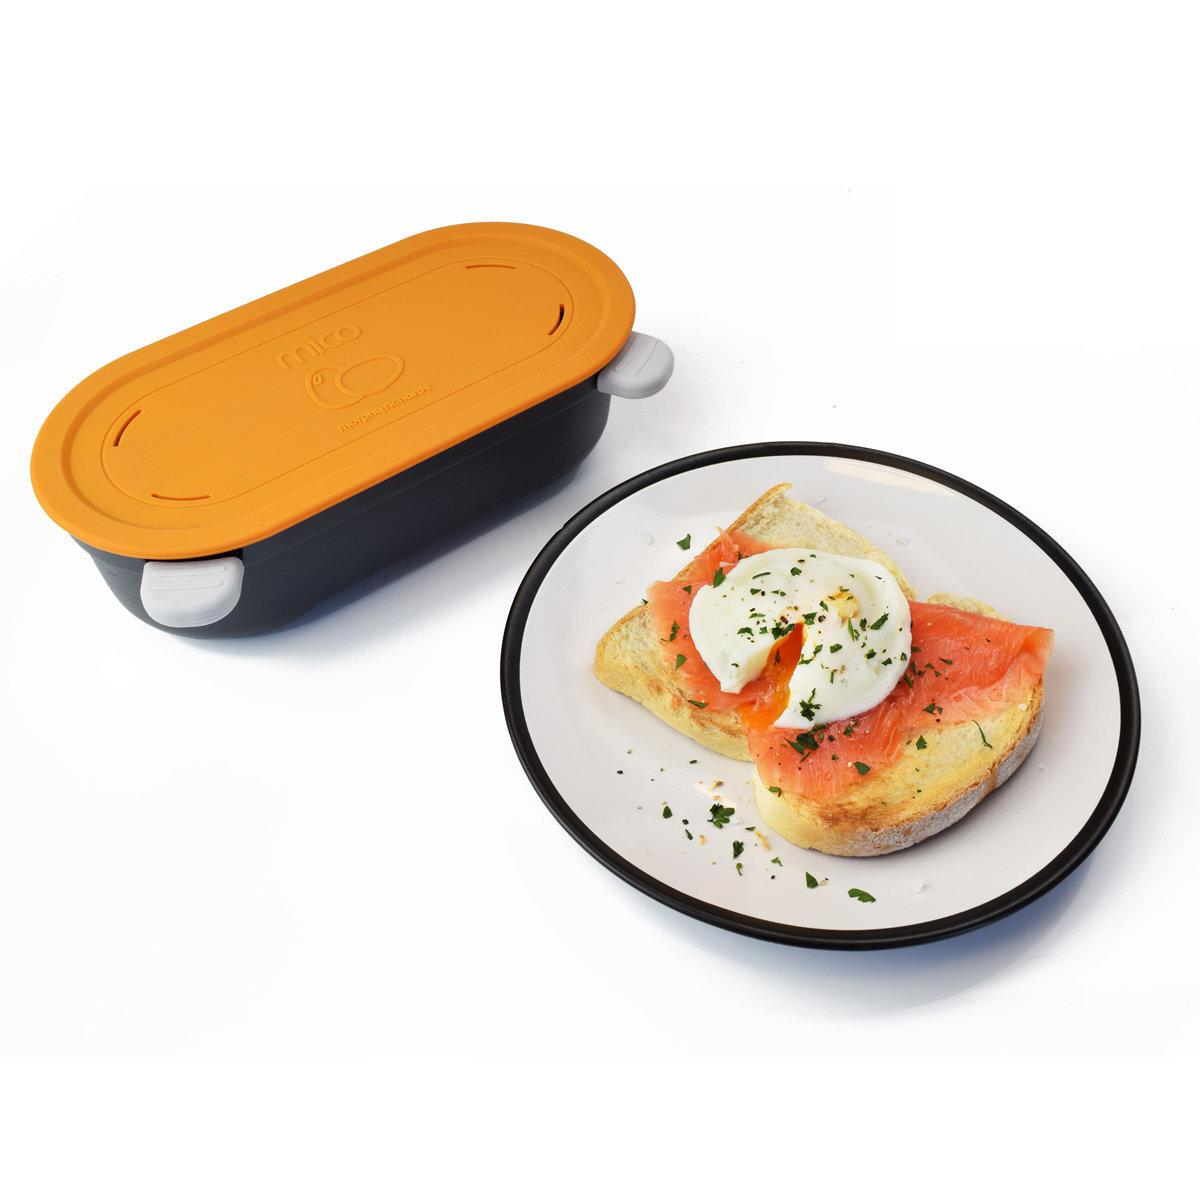 Morphy Richards Microwave Cookware MICO Toasted Sandwich Maker 511647 MICO  Microwave Cookware Toastie Maker, Orange Kitchen - Compare prices